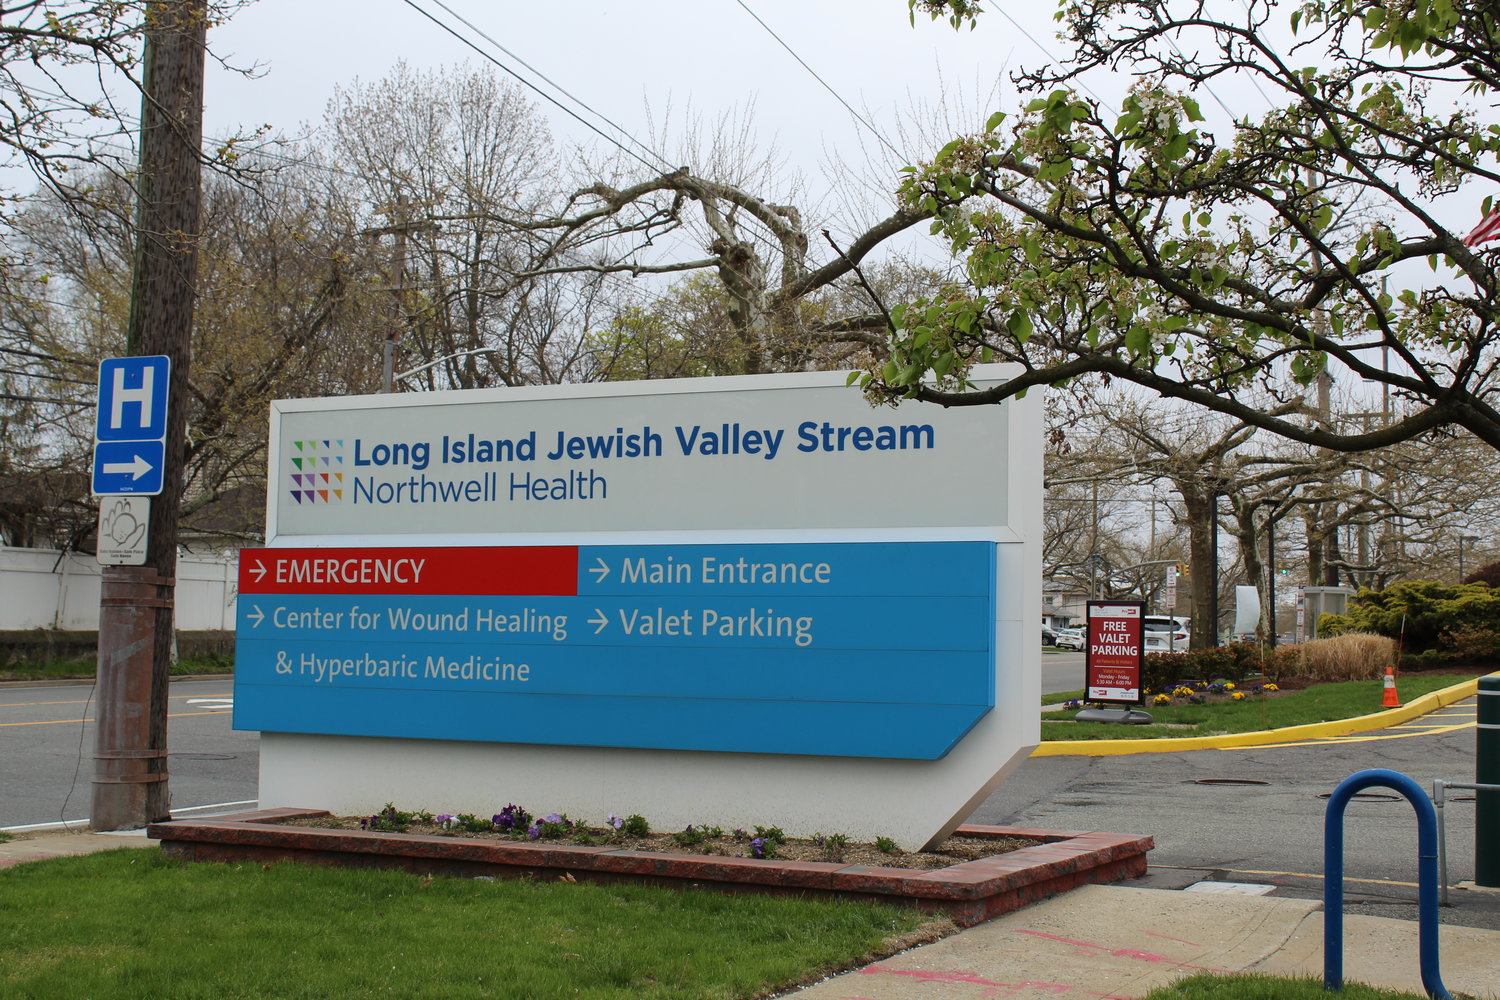 Long Island Jewish Valley Stream Hospital is located at 900 Franklin Ave, Valley Stream, NY 11580.